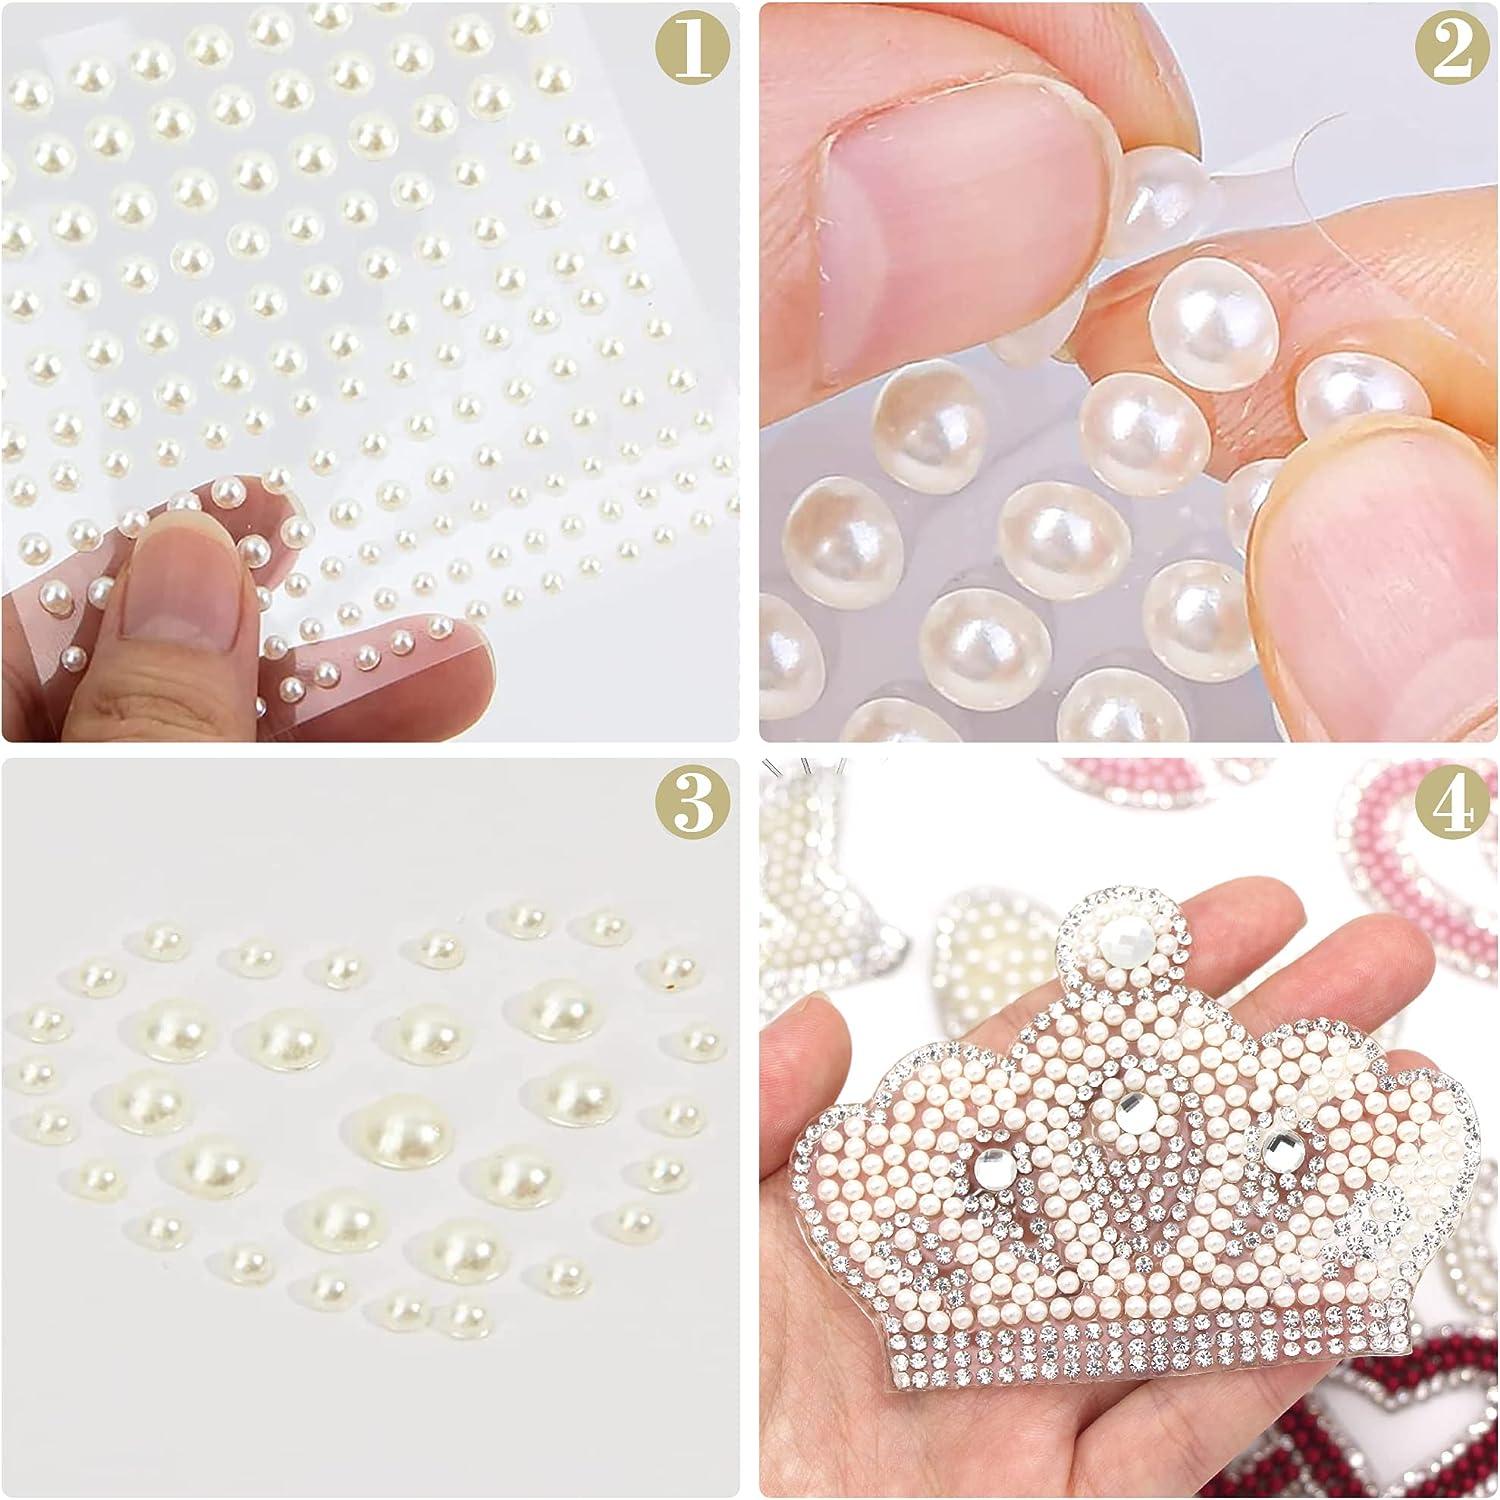  NIACONN 1320pcs Ehite Hair Pearls Stick on, Bling Pearl  Stickers Self Adhesive Pearl Hair Gems for Prom, Wedding & DIY : Beauty &  Personal Care